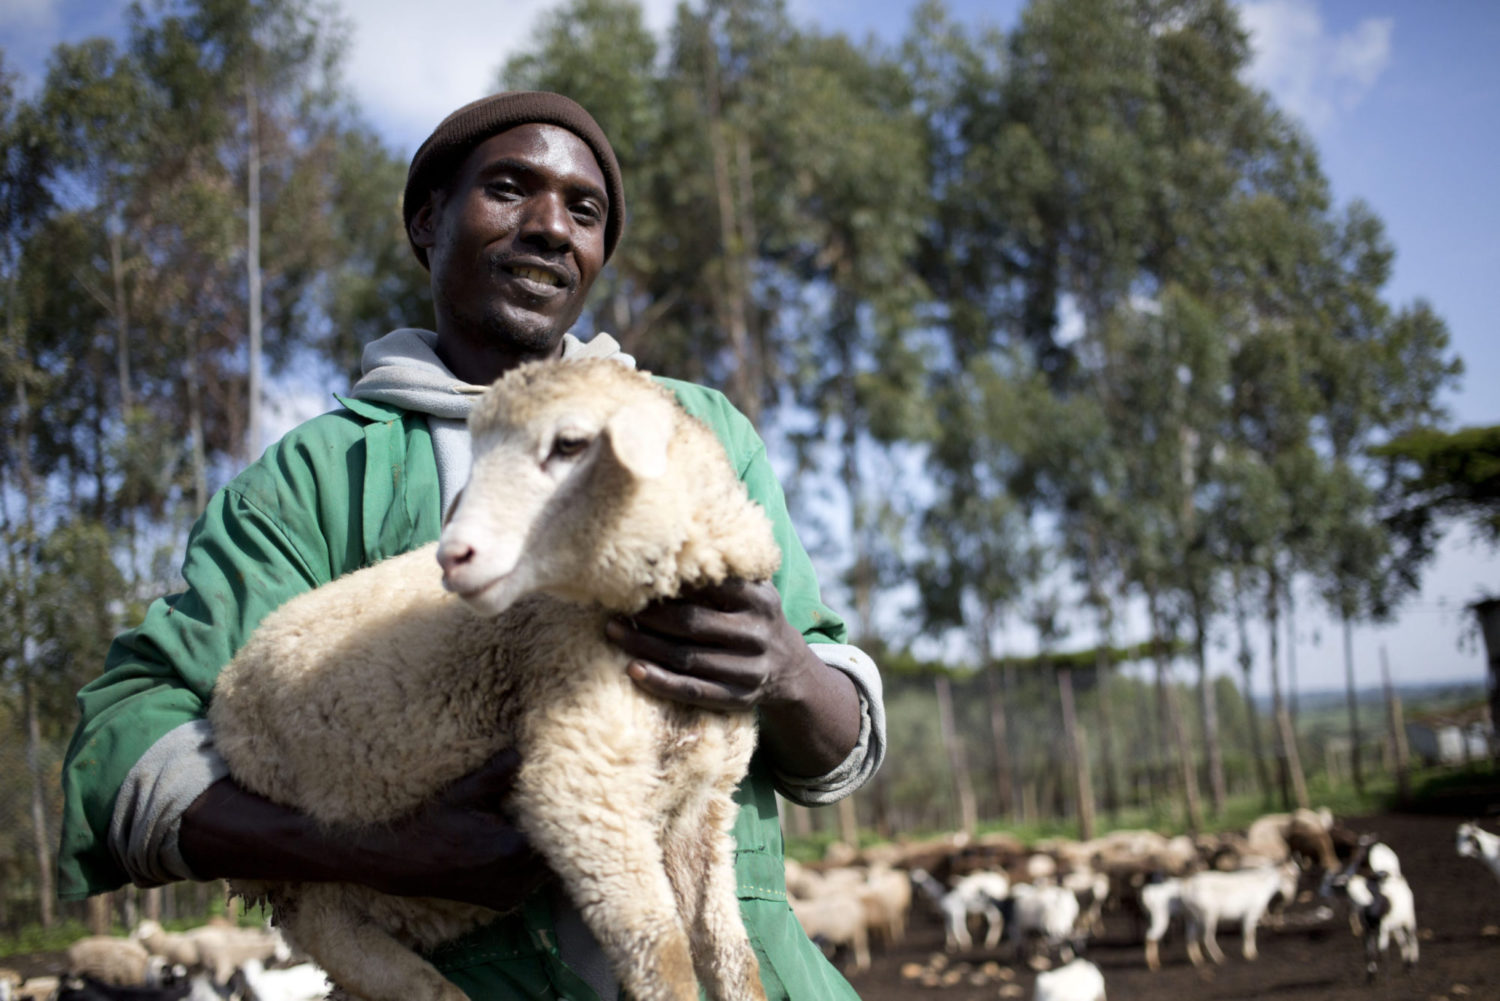 A man in Kenya holds a sheep